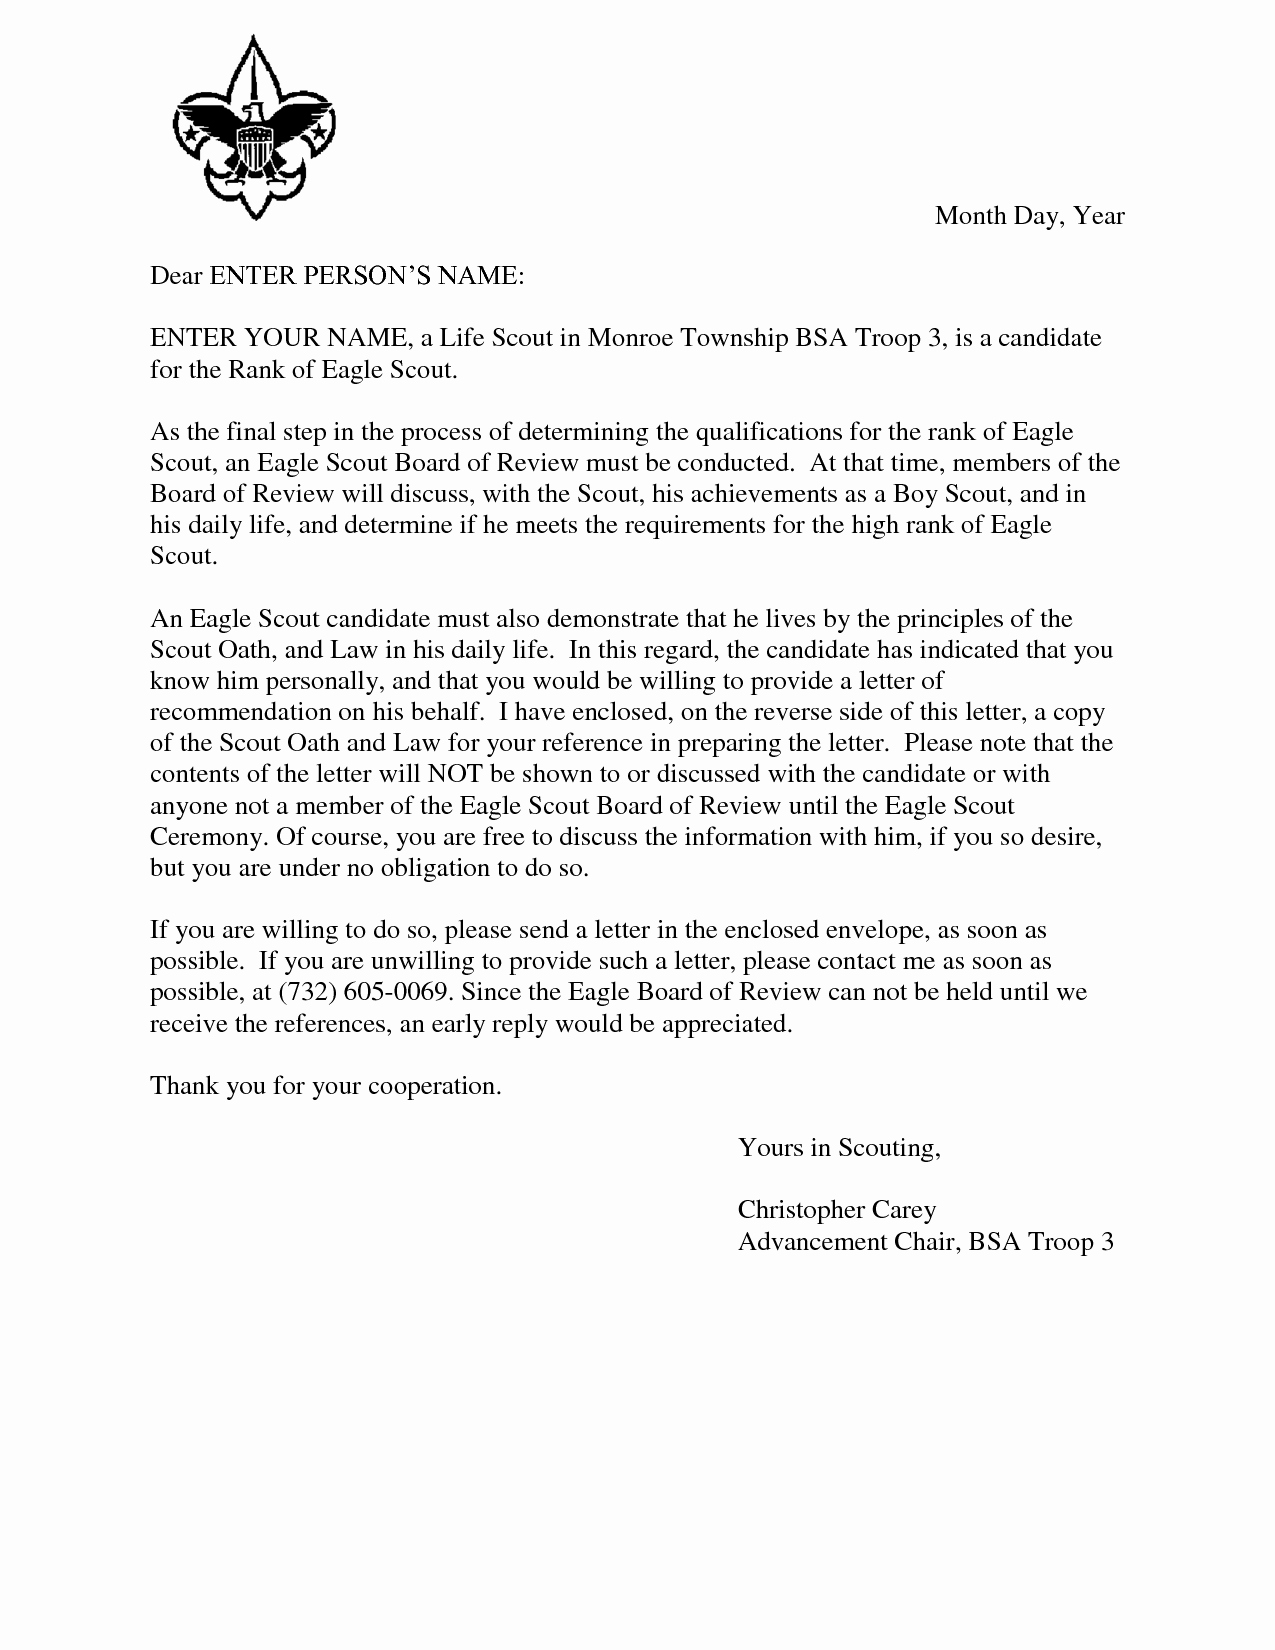 Eagle Scout Recommendation Letter Samples Fresh Eagle Scout Reference Request Sample Letter Doc 7 by